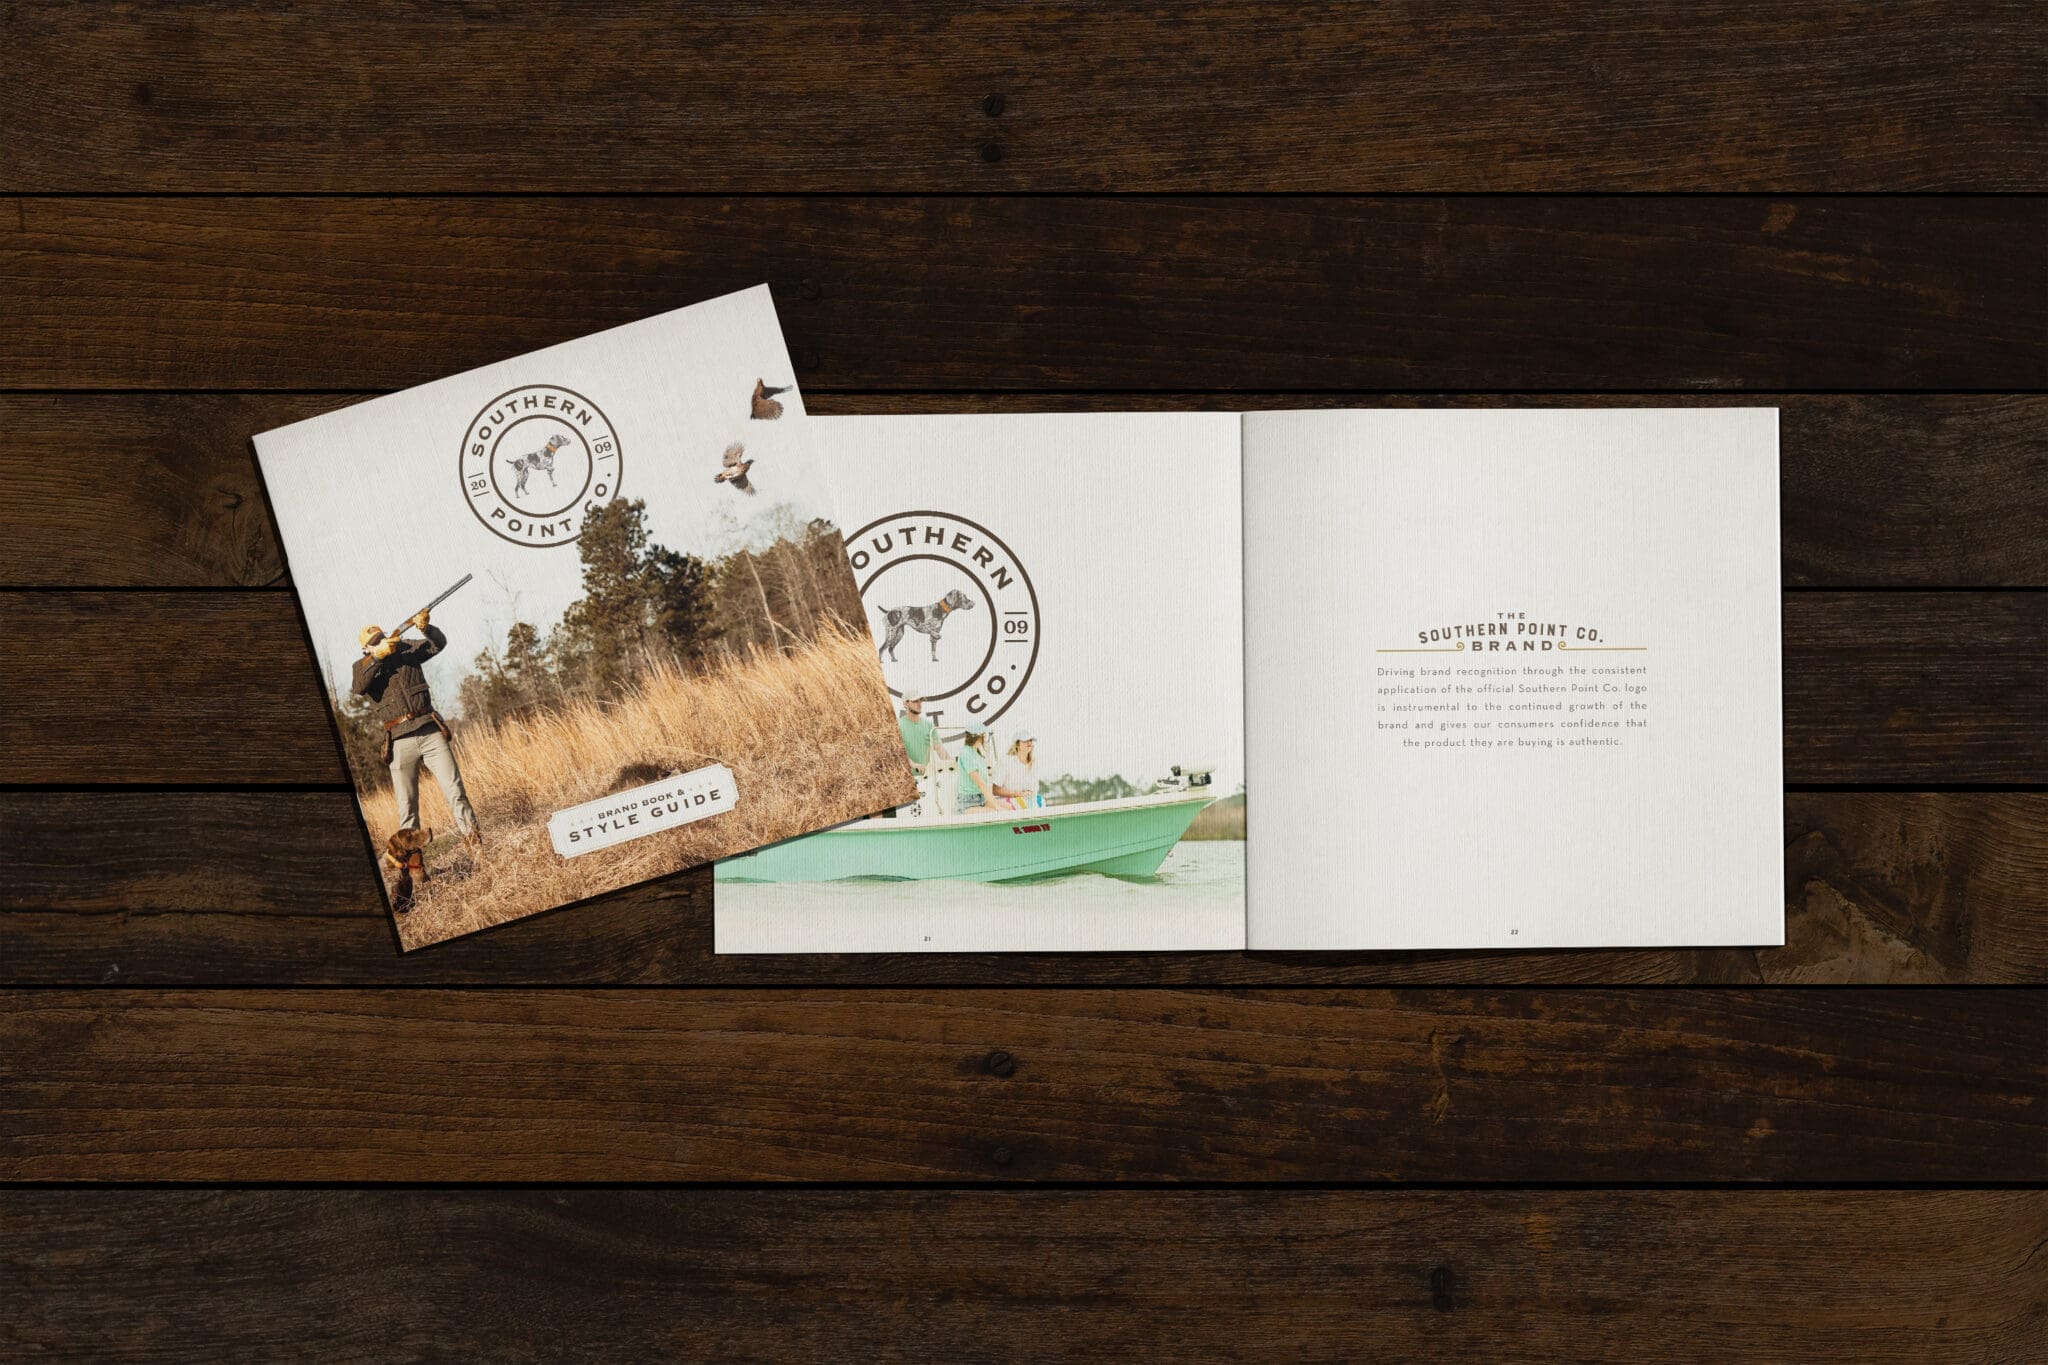 Southern Point Co. brand book